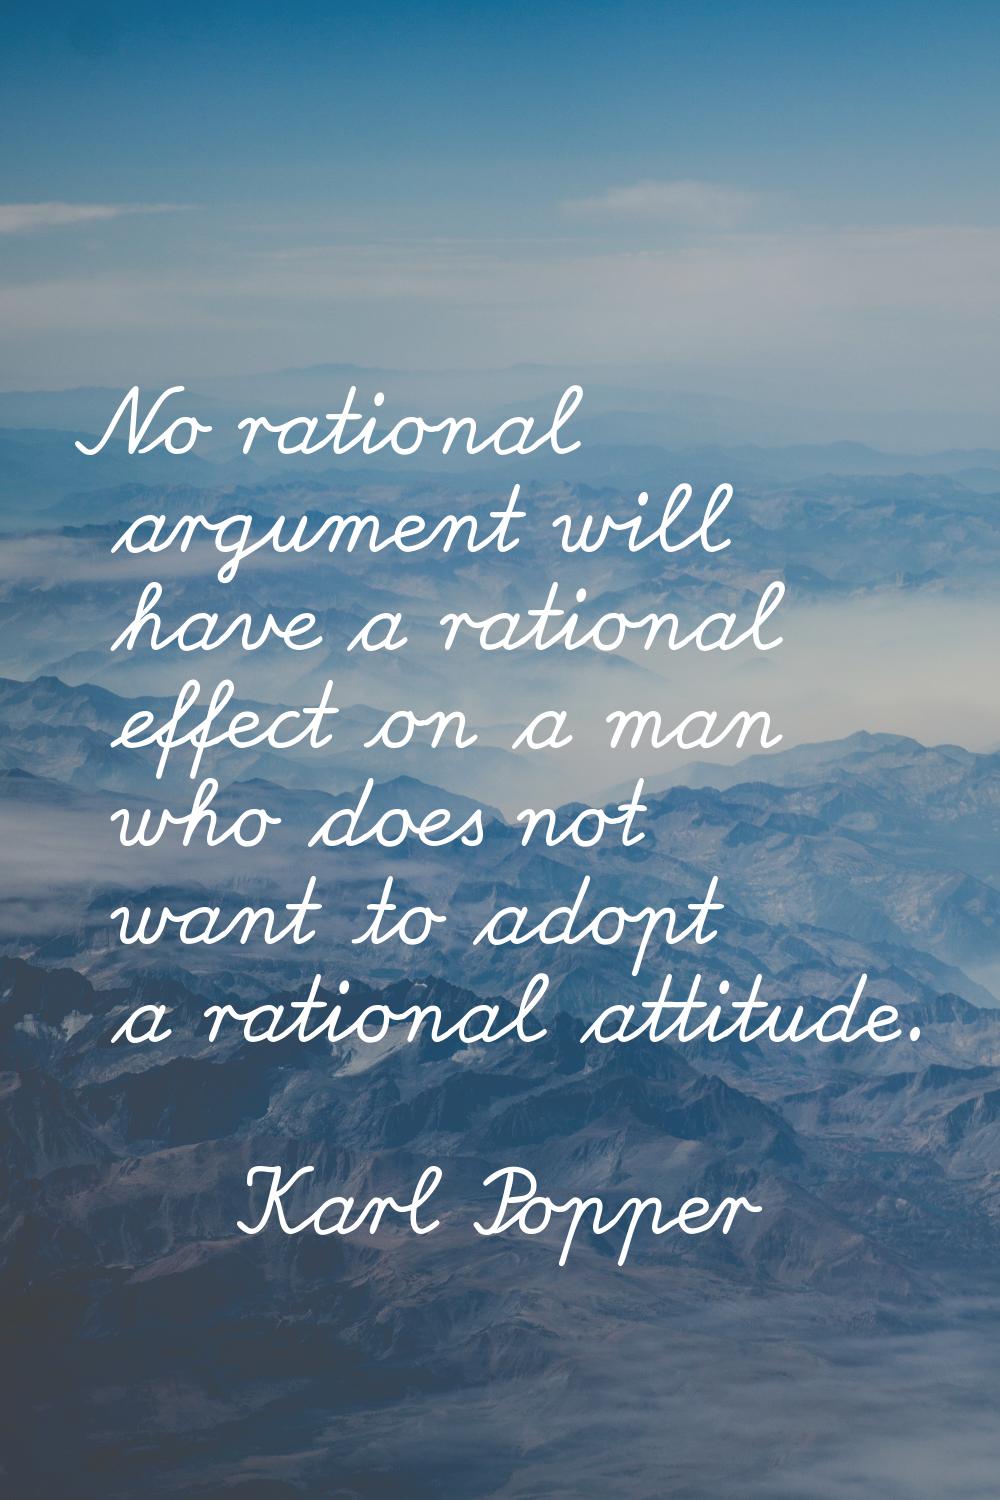 No rational argument will have a rational effect on a man who does not want to adopt a rational att